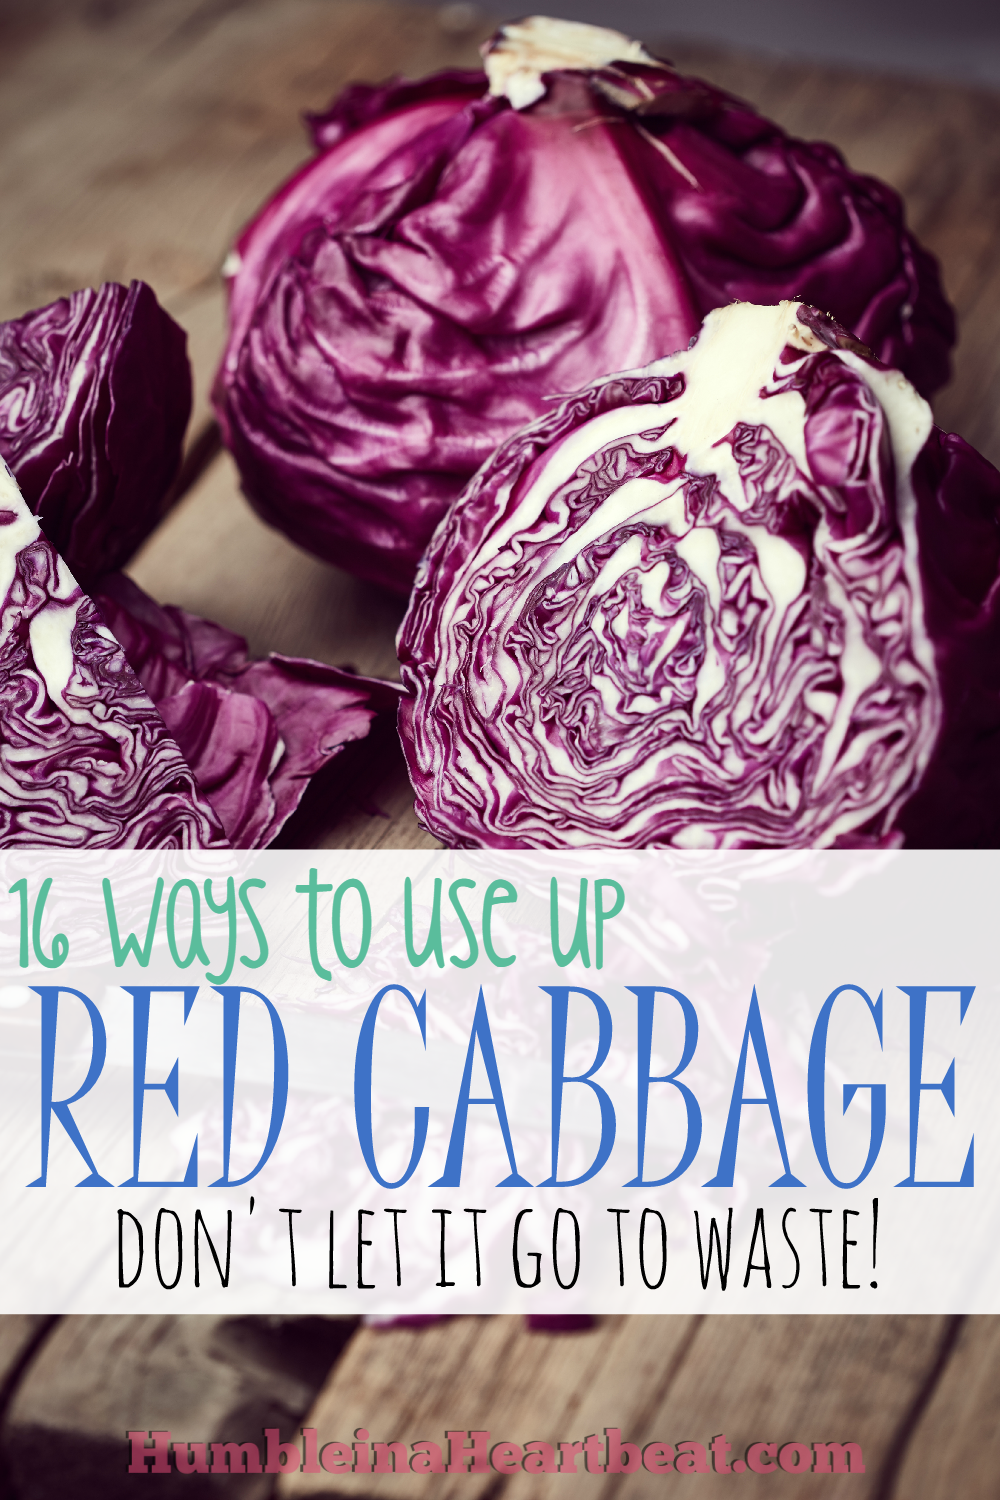 Ever bought some red cabbage for a recipe and then just let it sit in your fridge until it went bad? I have! Let's stop doing that and use it up with these great recipes!